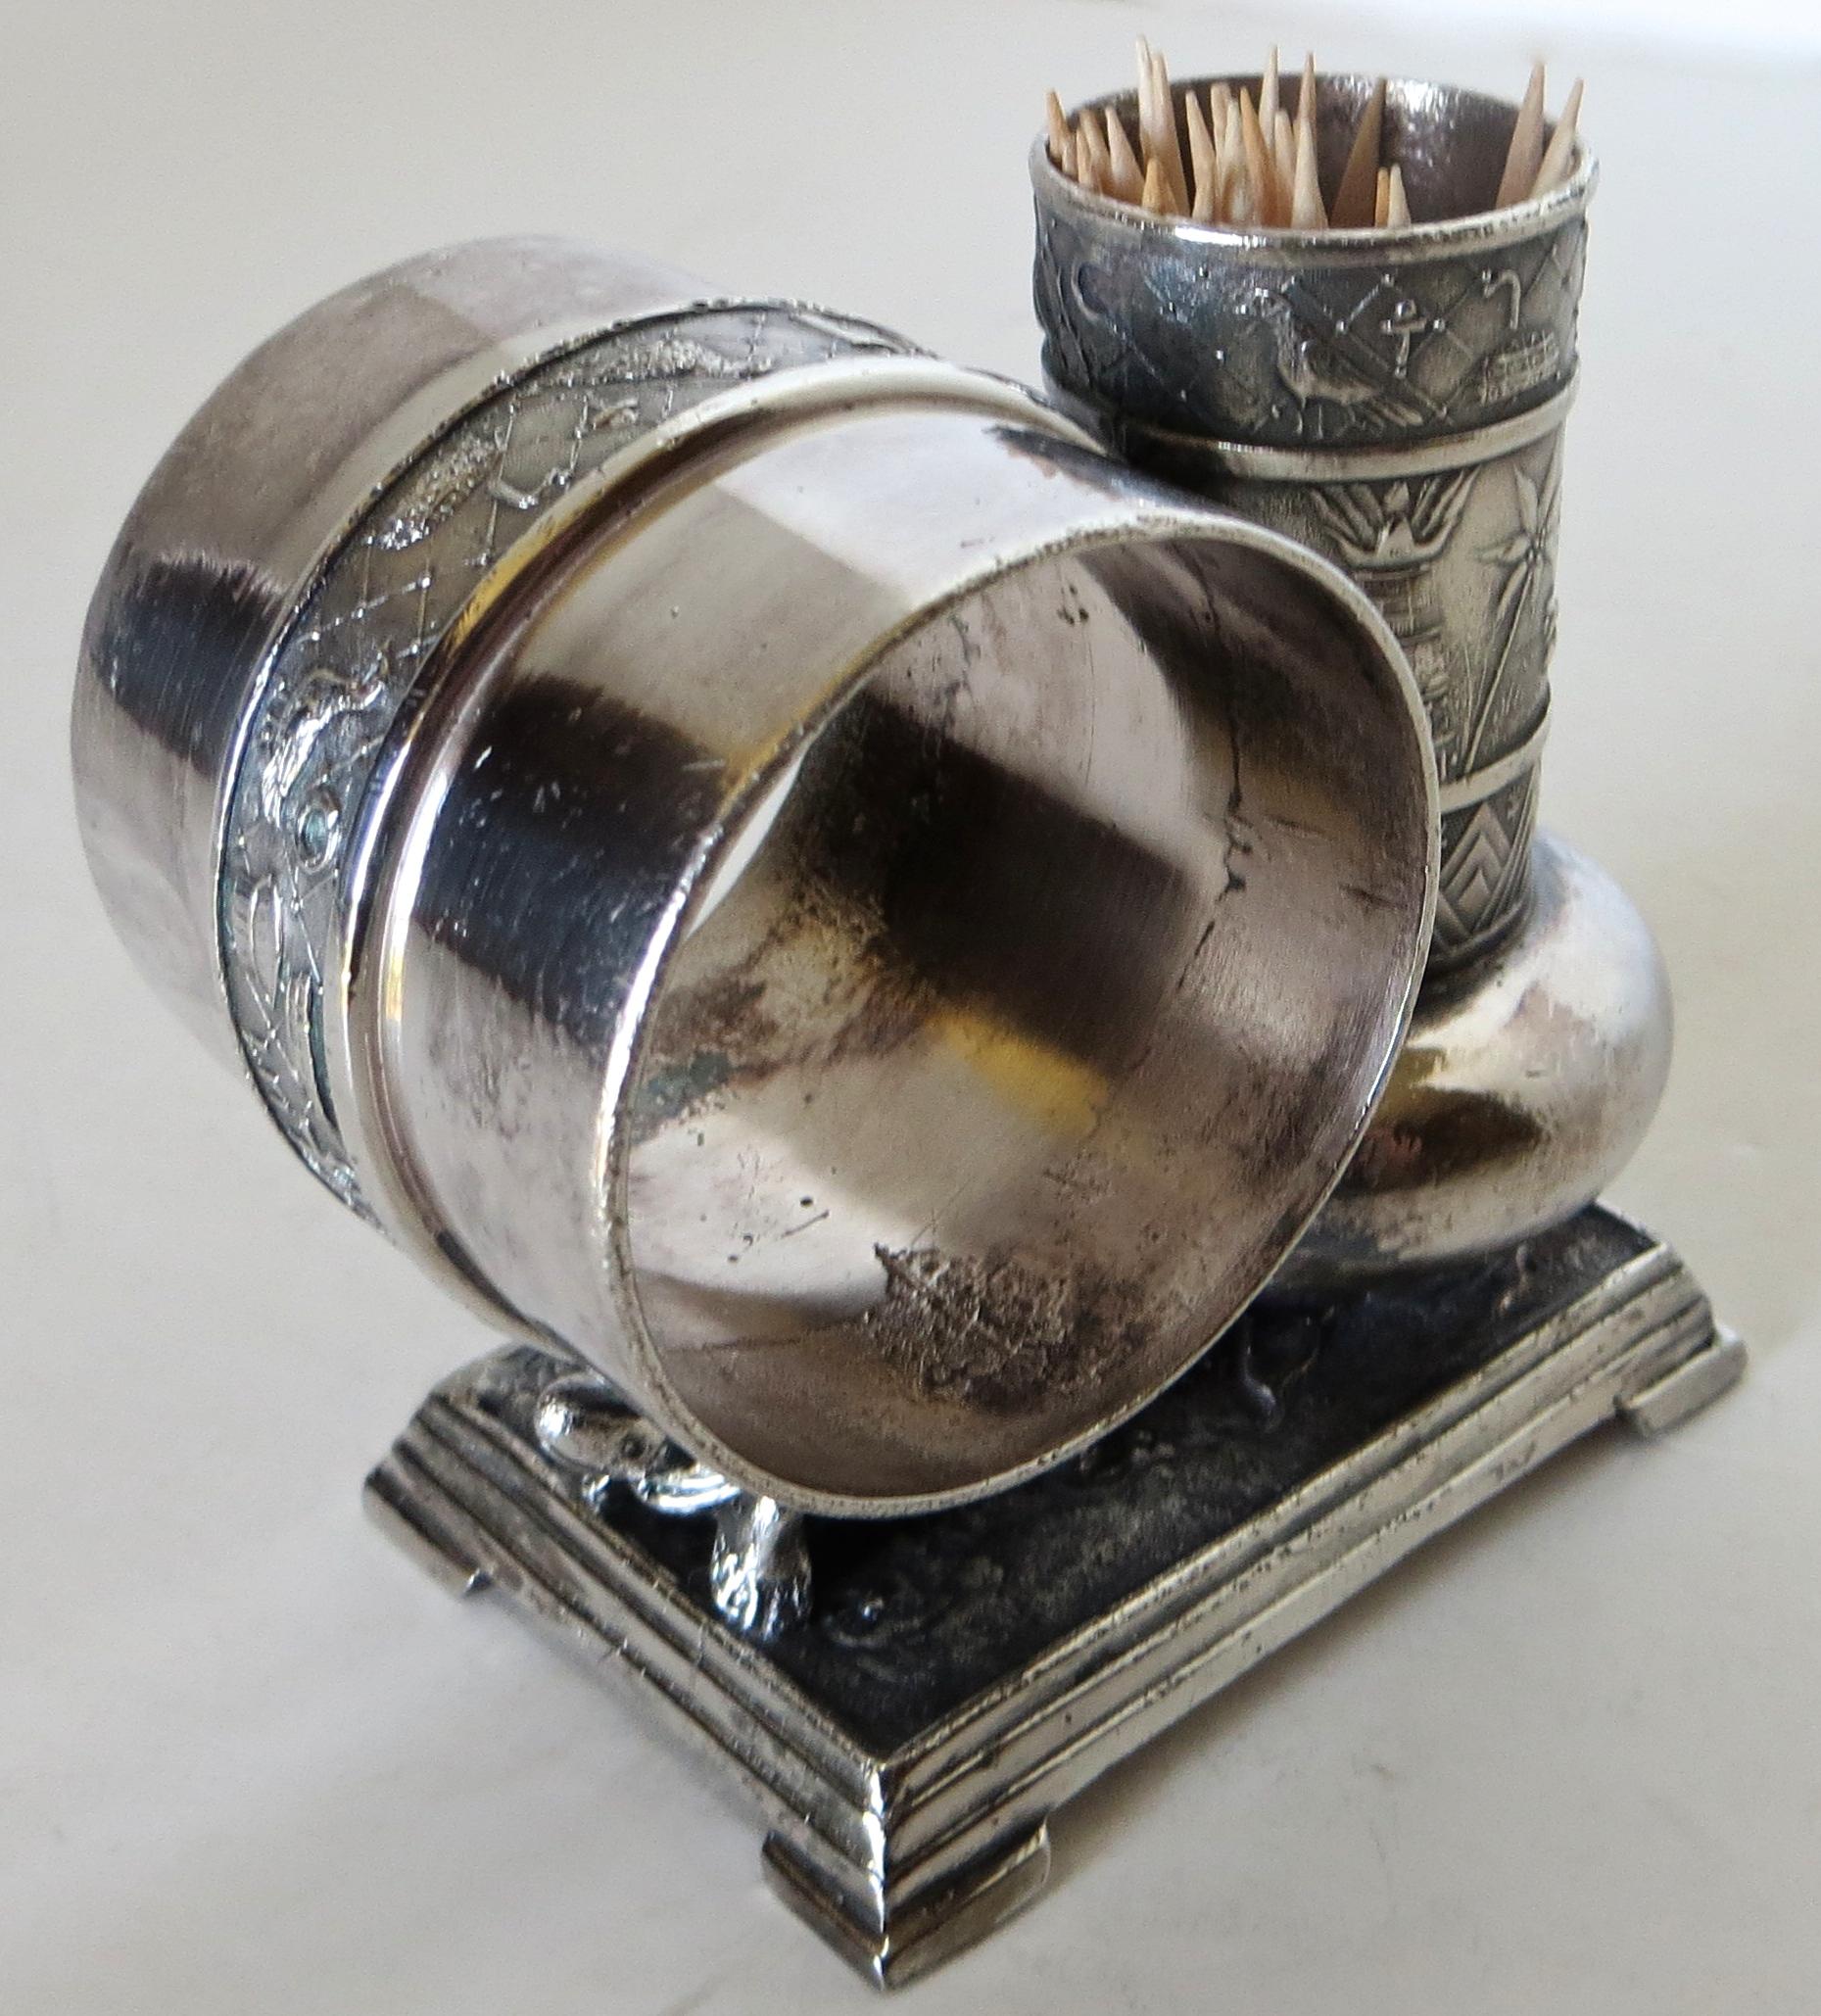 As with all Victorian figurals, this combination silver plated Turtle napkin ring and attached bud vase is much sough after by Americana collectors. Rings were used, not only for entertaining and special occasions, but also to identify each member